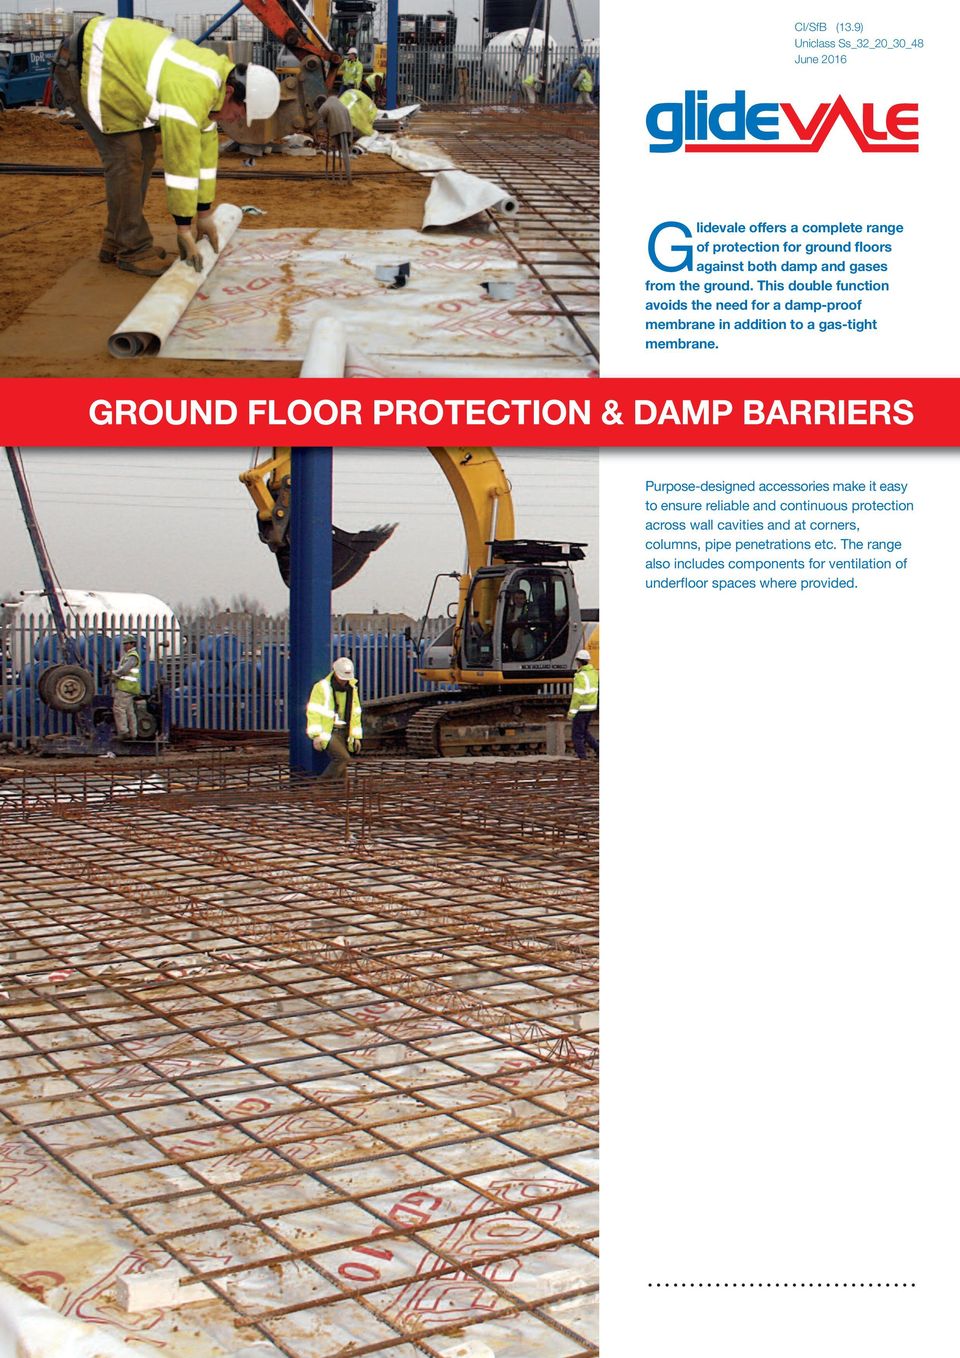 ground. This double function avoids the need for a damp-proof membrane in addition to a gas-tight membrane.